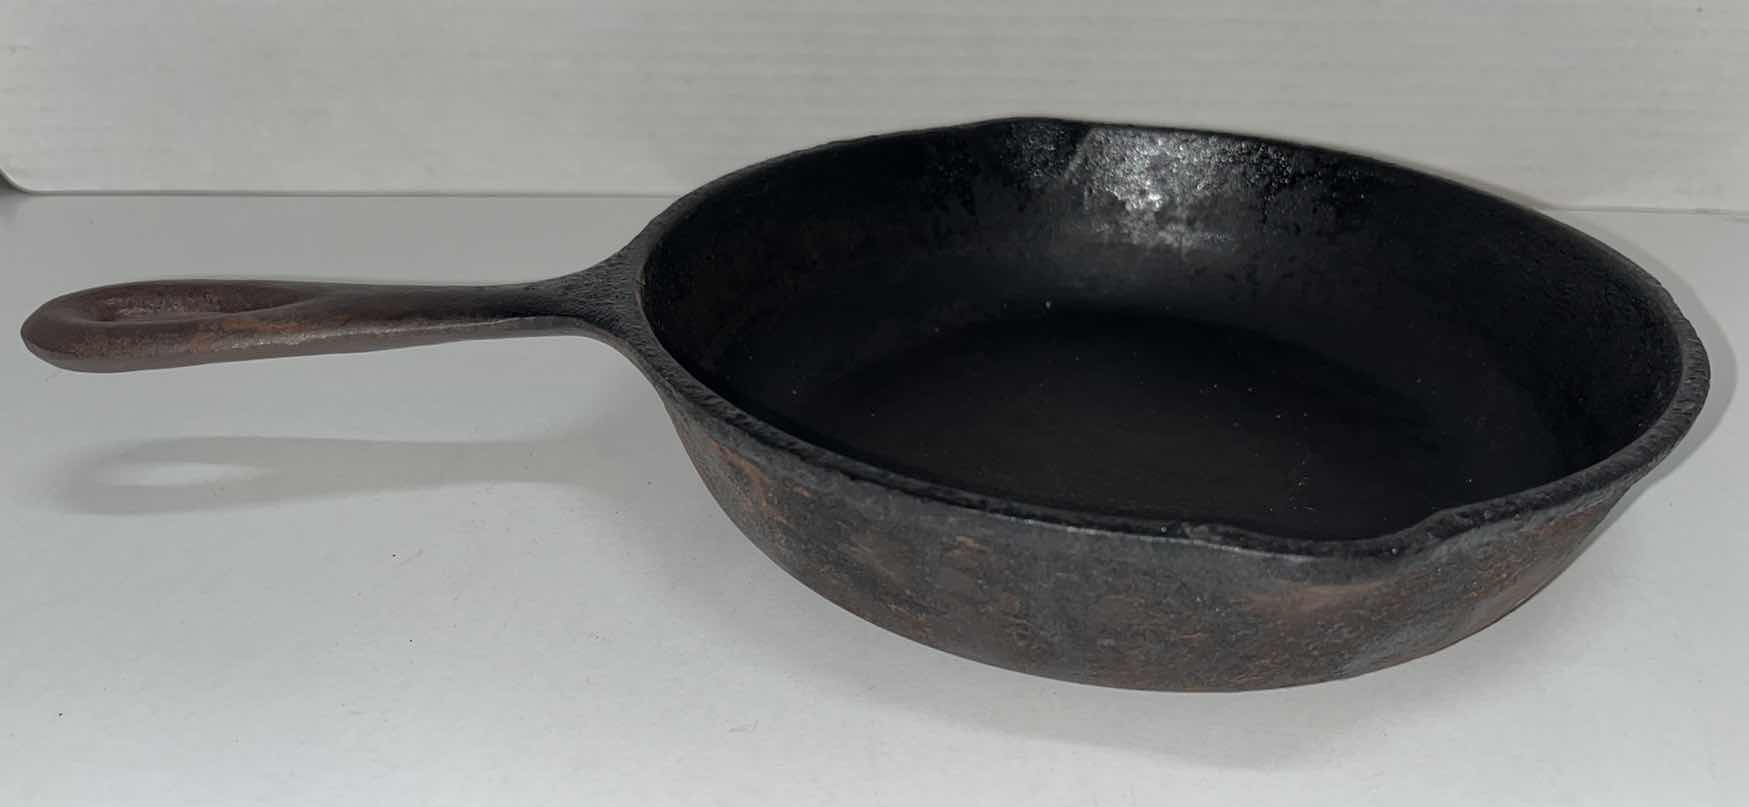 Photo 5 of LODGE USA 90G 10.5” CAST IRON ROUND GRIDDLE FLAT SKILLET PAN & 8 1/8” SKILLET (2)